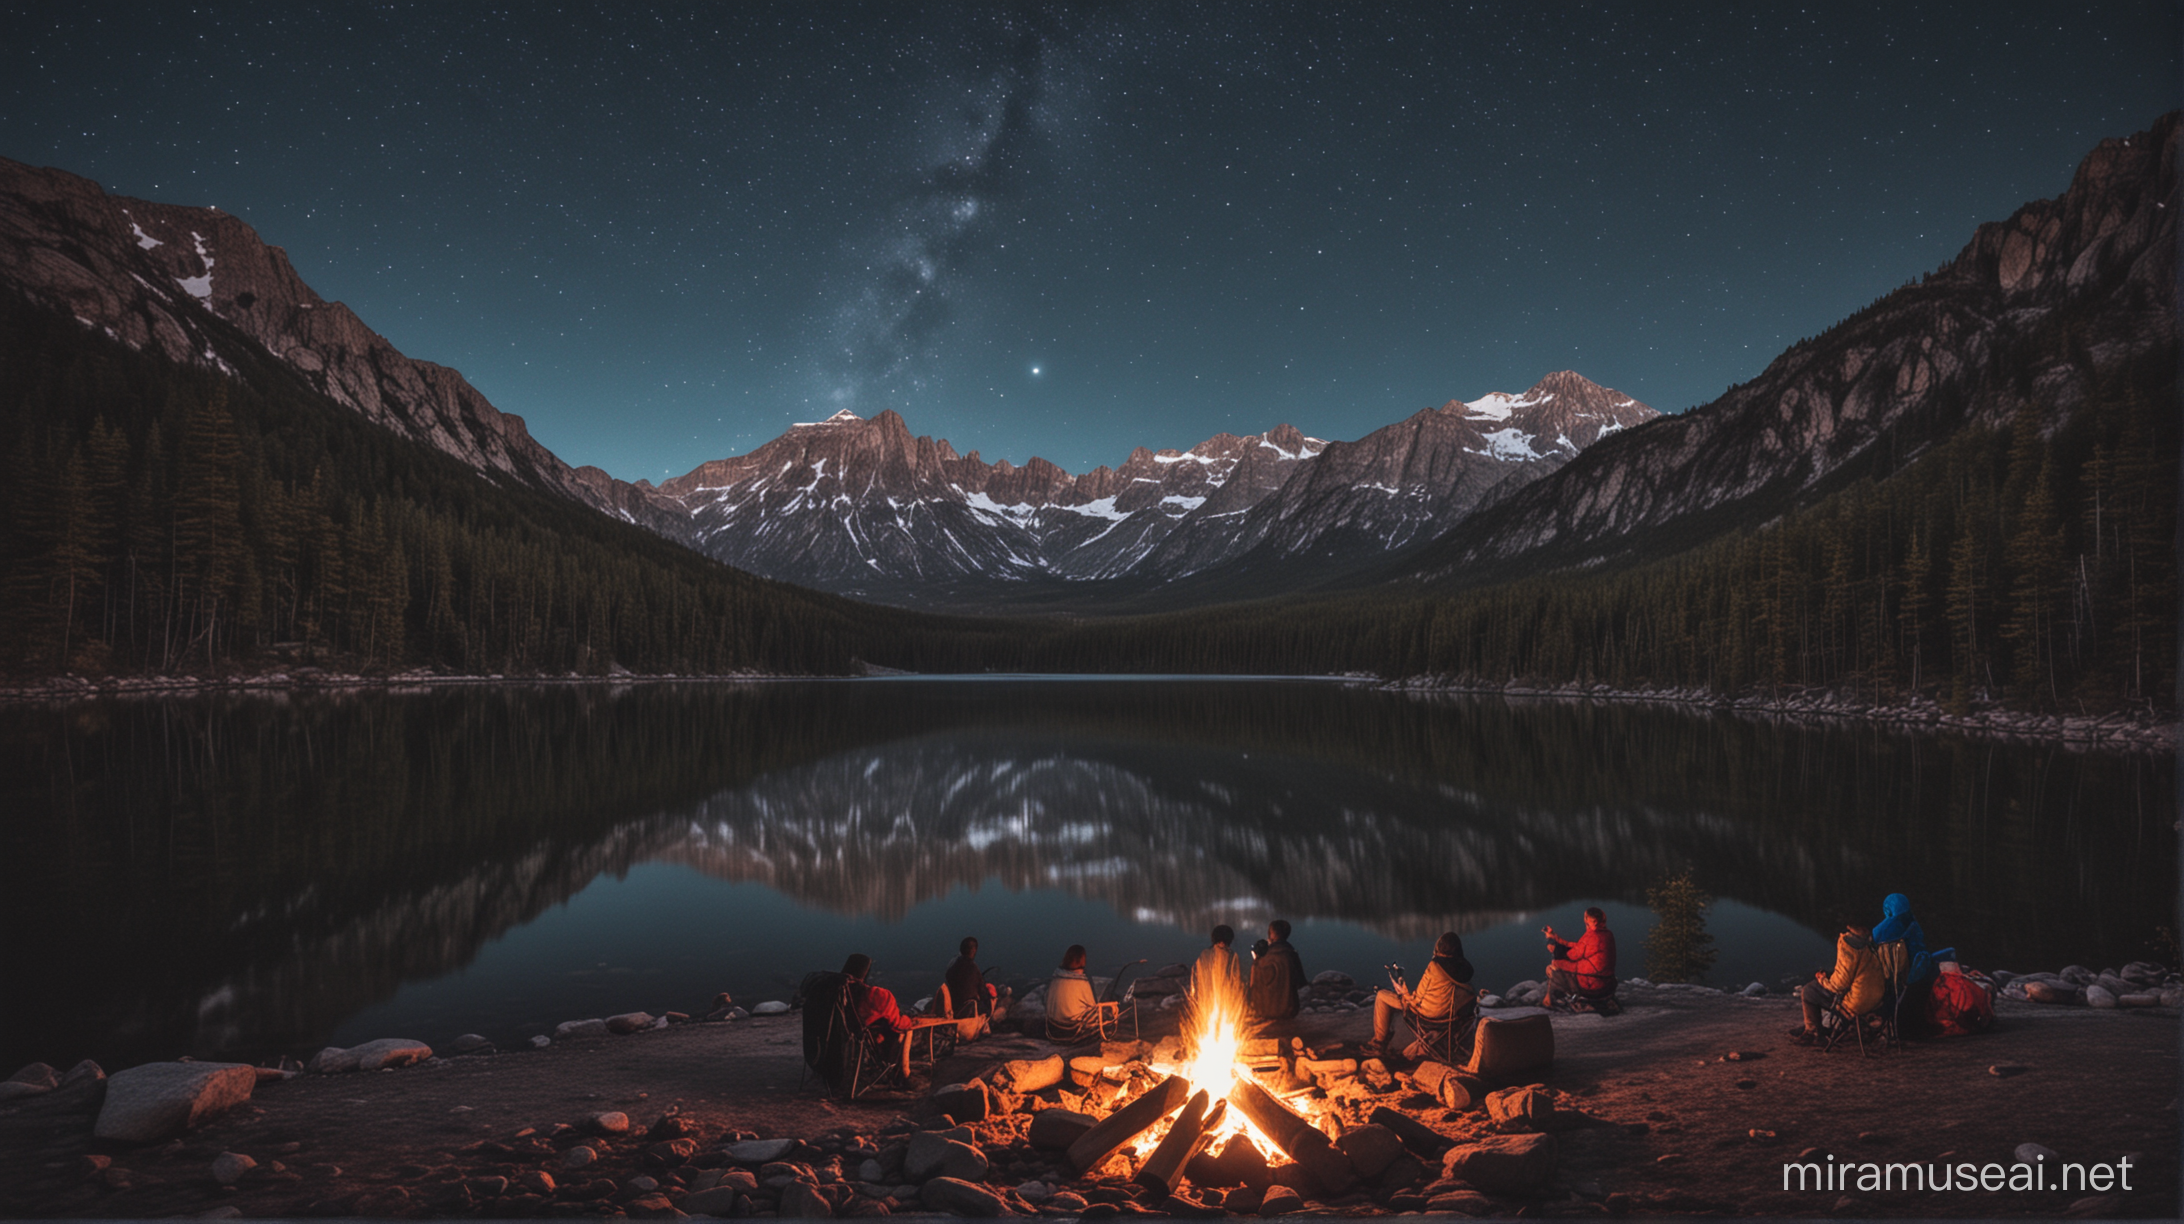 Serenity under Starlit Skies Camping by a Mountain Lake with Tinted Waters and a Glowing Campfire at Night